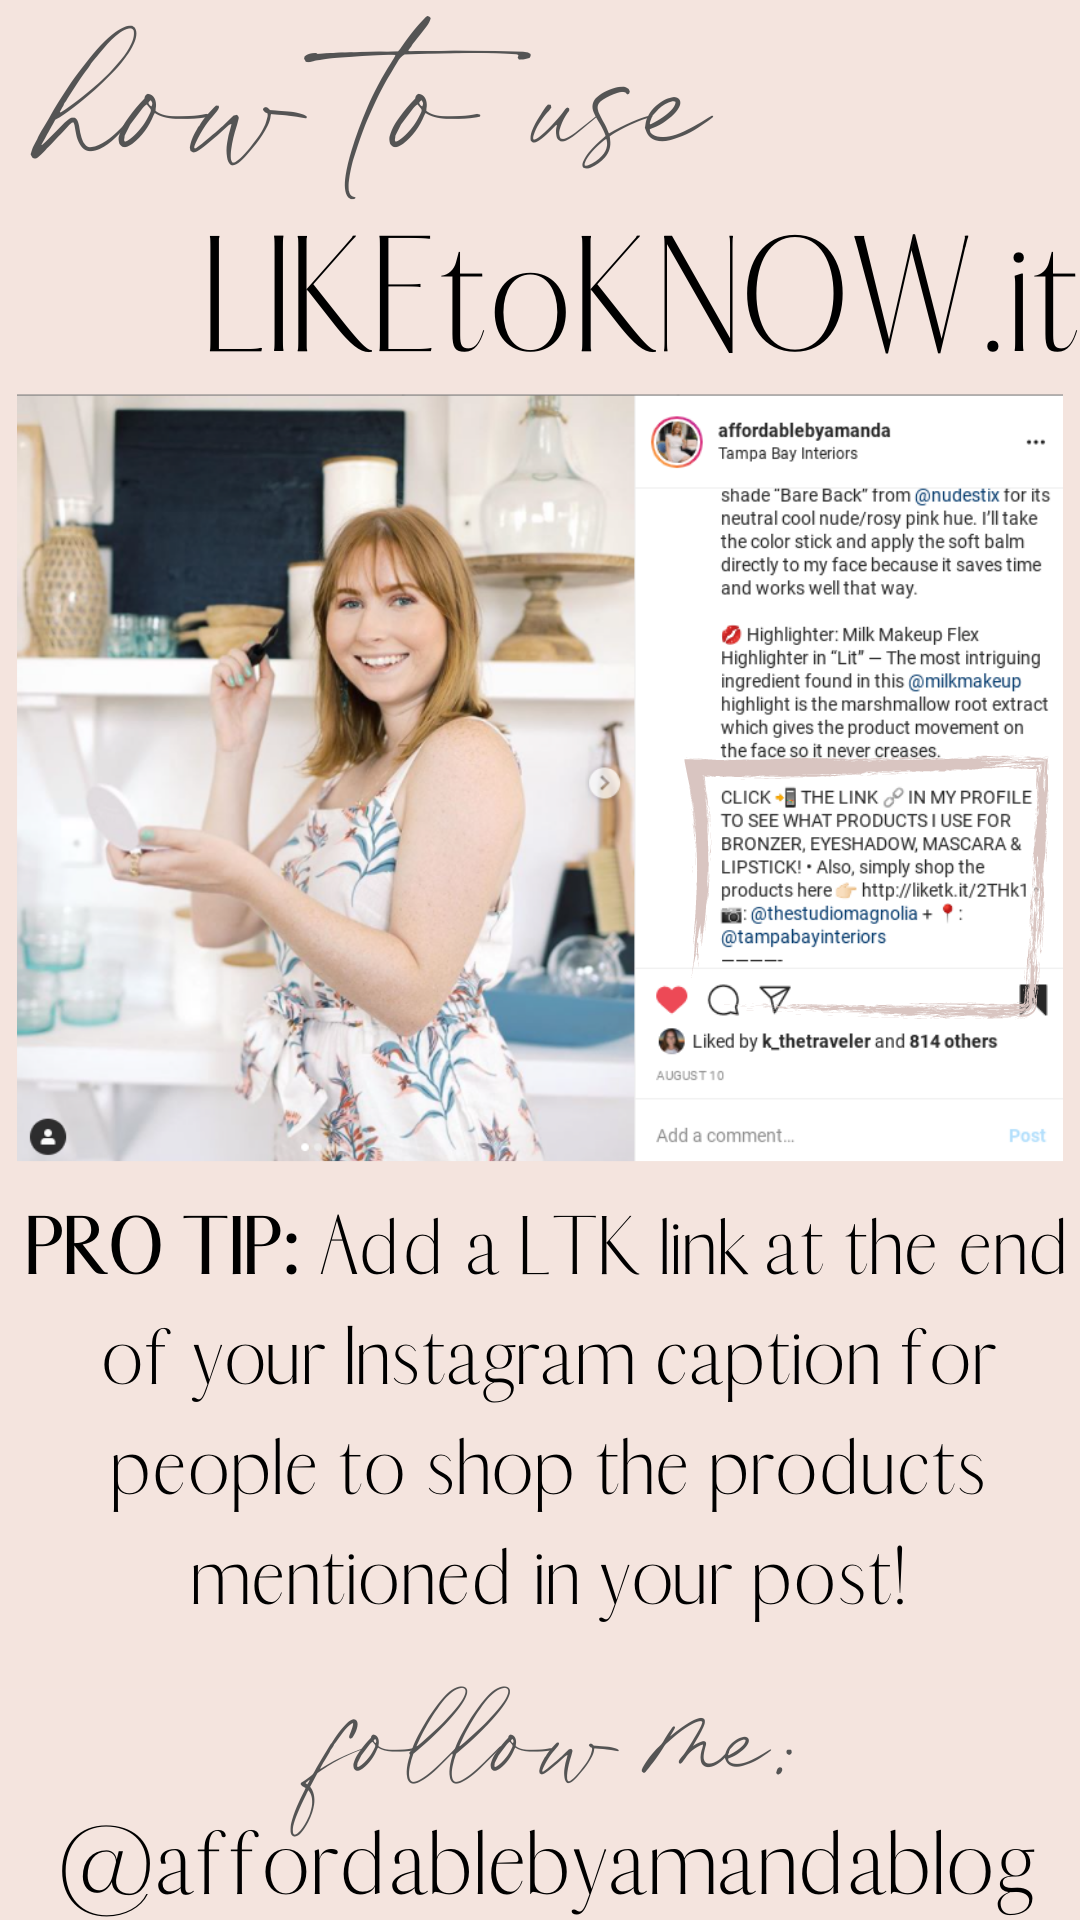 How to Use Liketoknowit as an Influencer | How to Make Money Blogging | How to Use The LIKEtoKNOW.it App as an Infliuencer